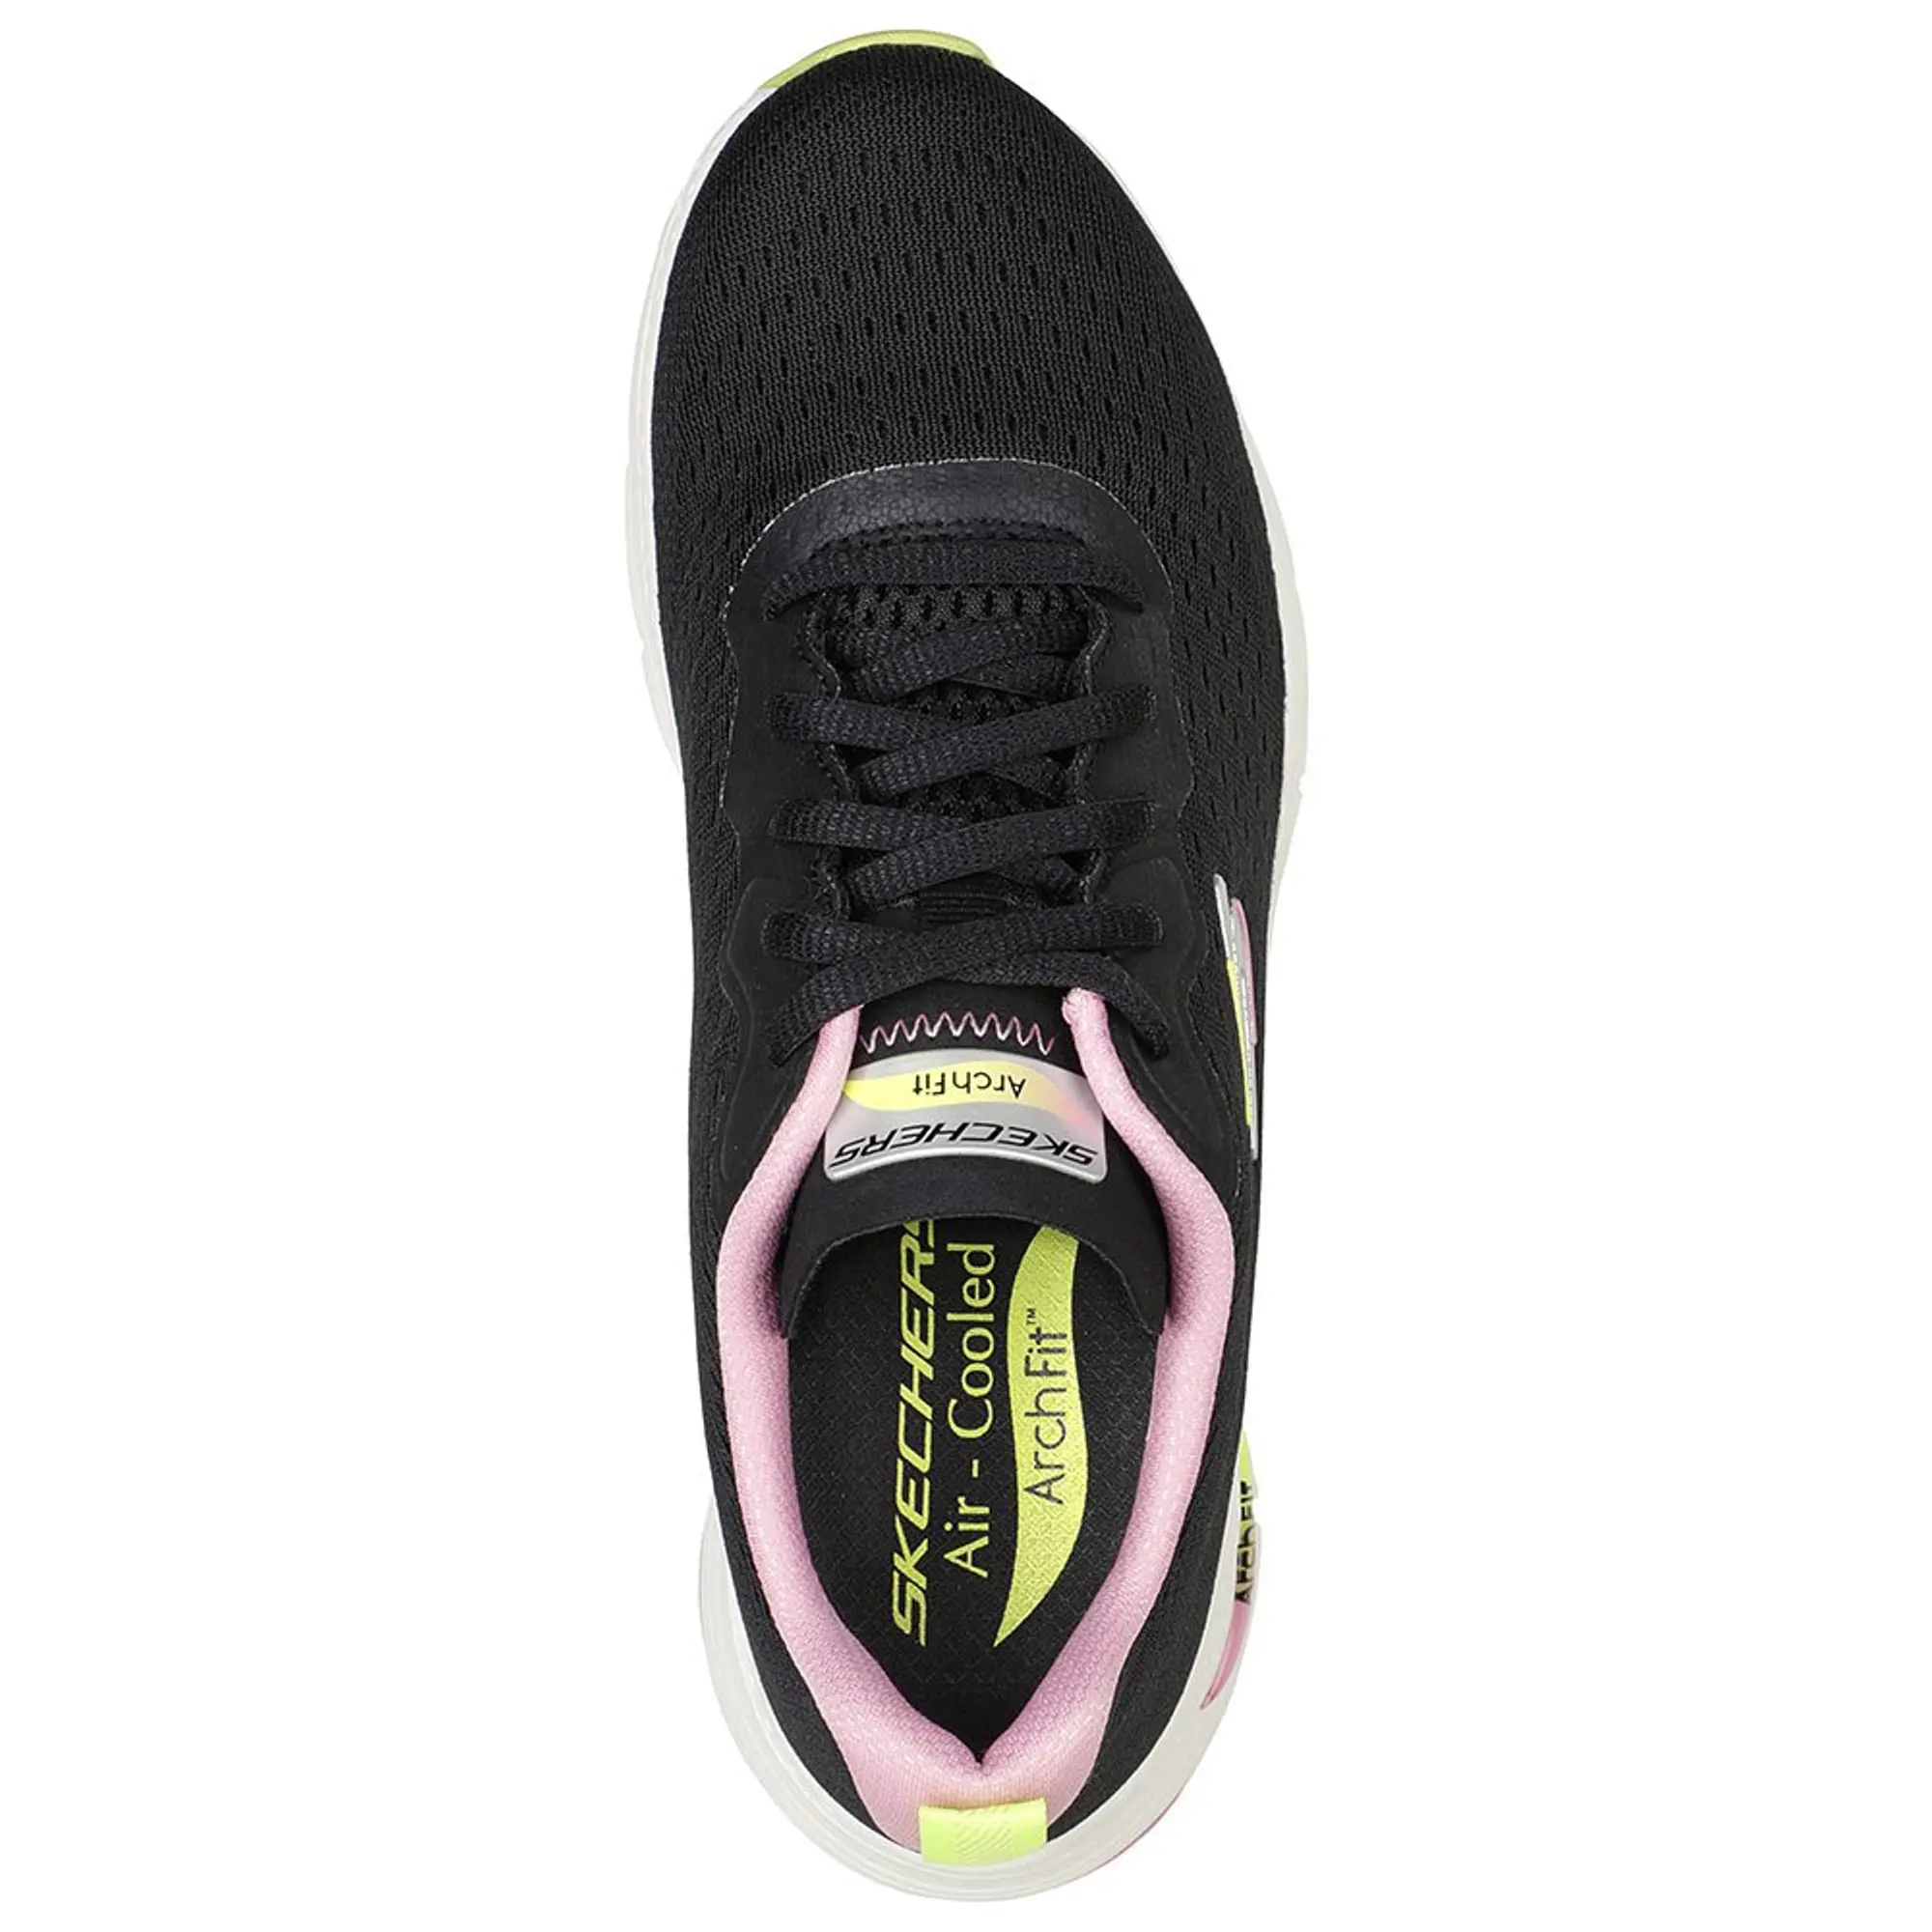 Skechers Arch Fit-infinity Cool Trainers  - Black